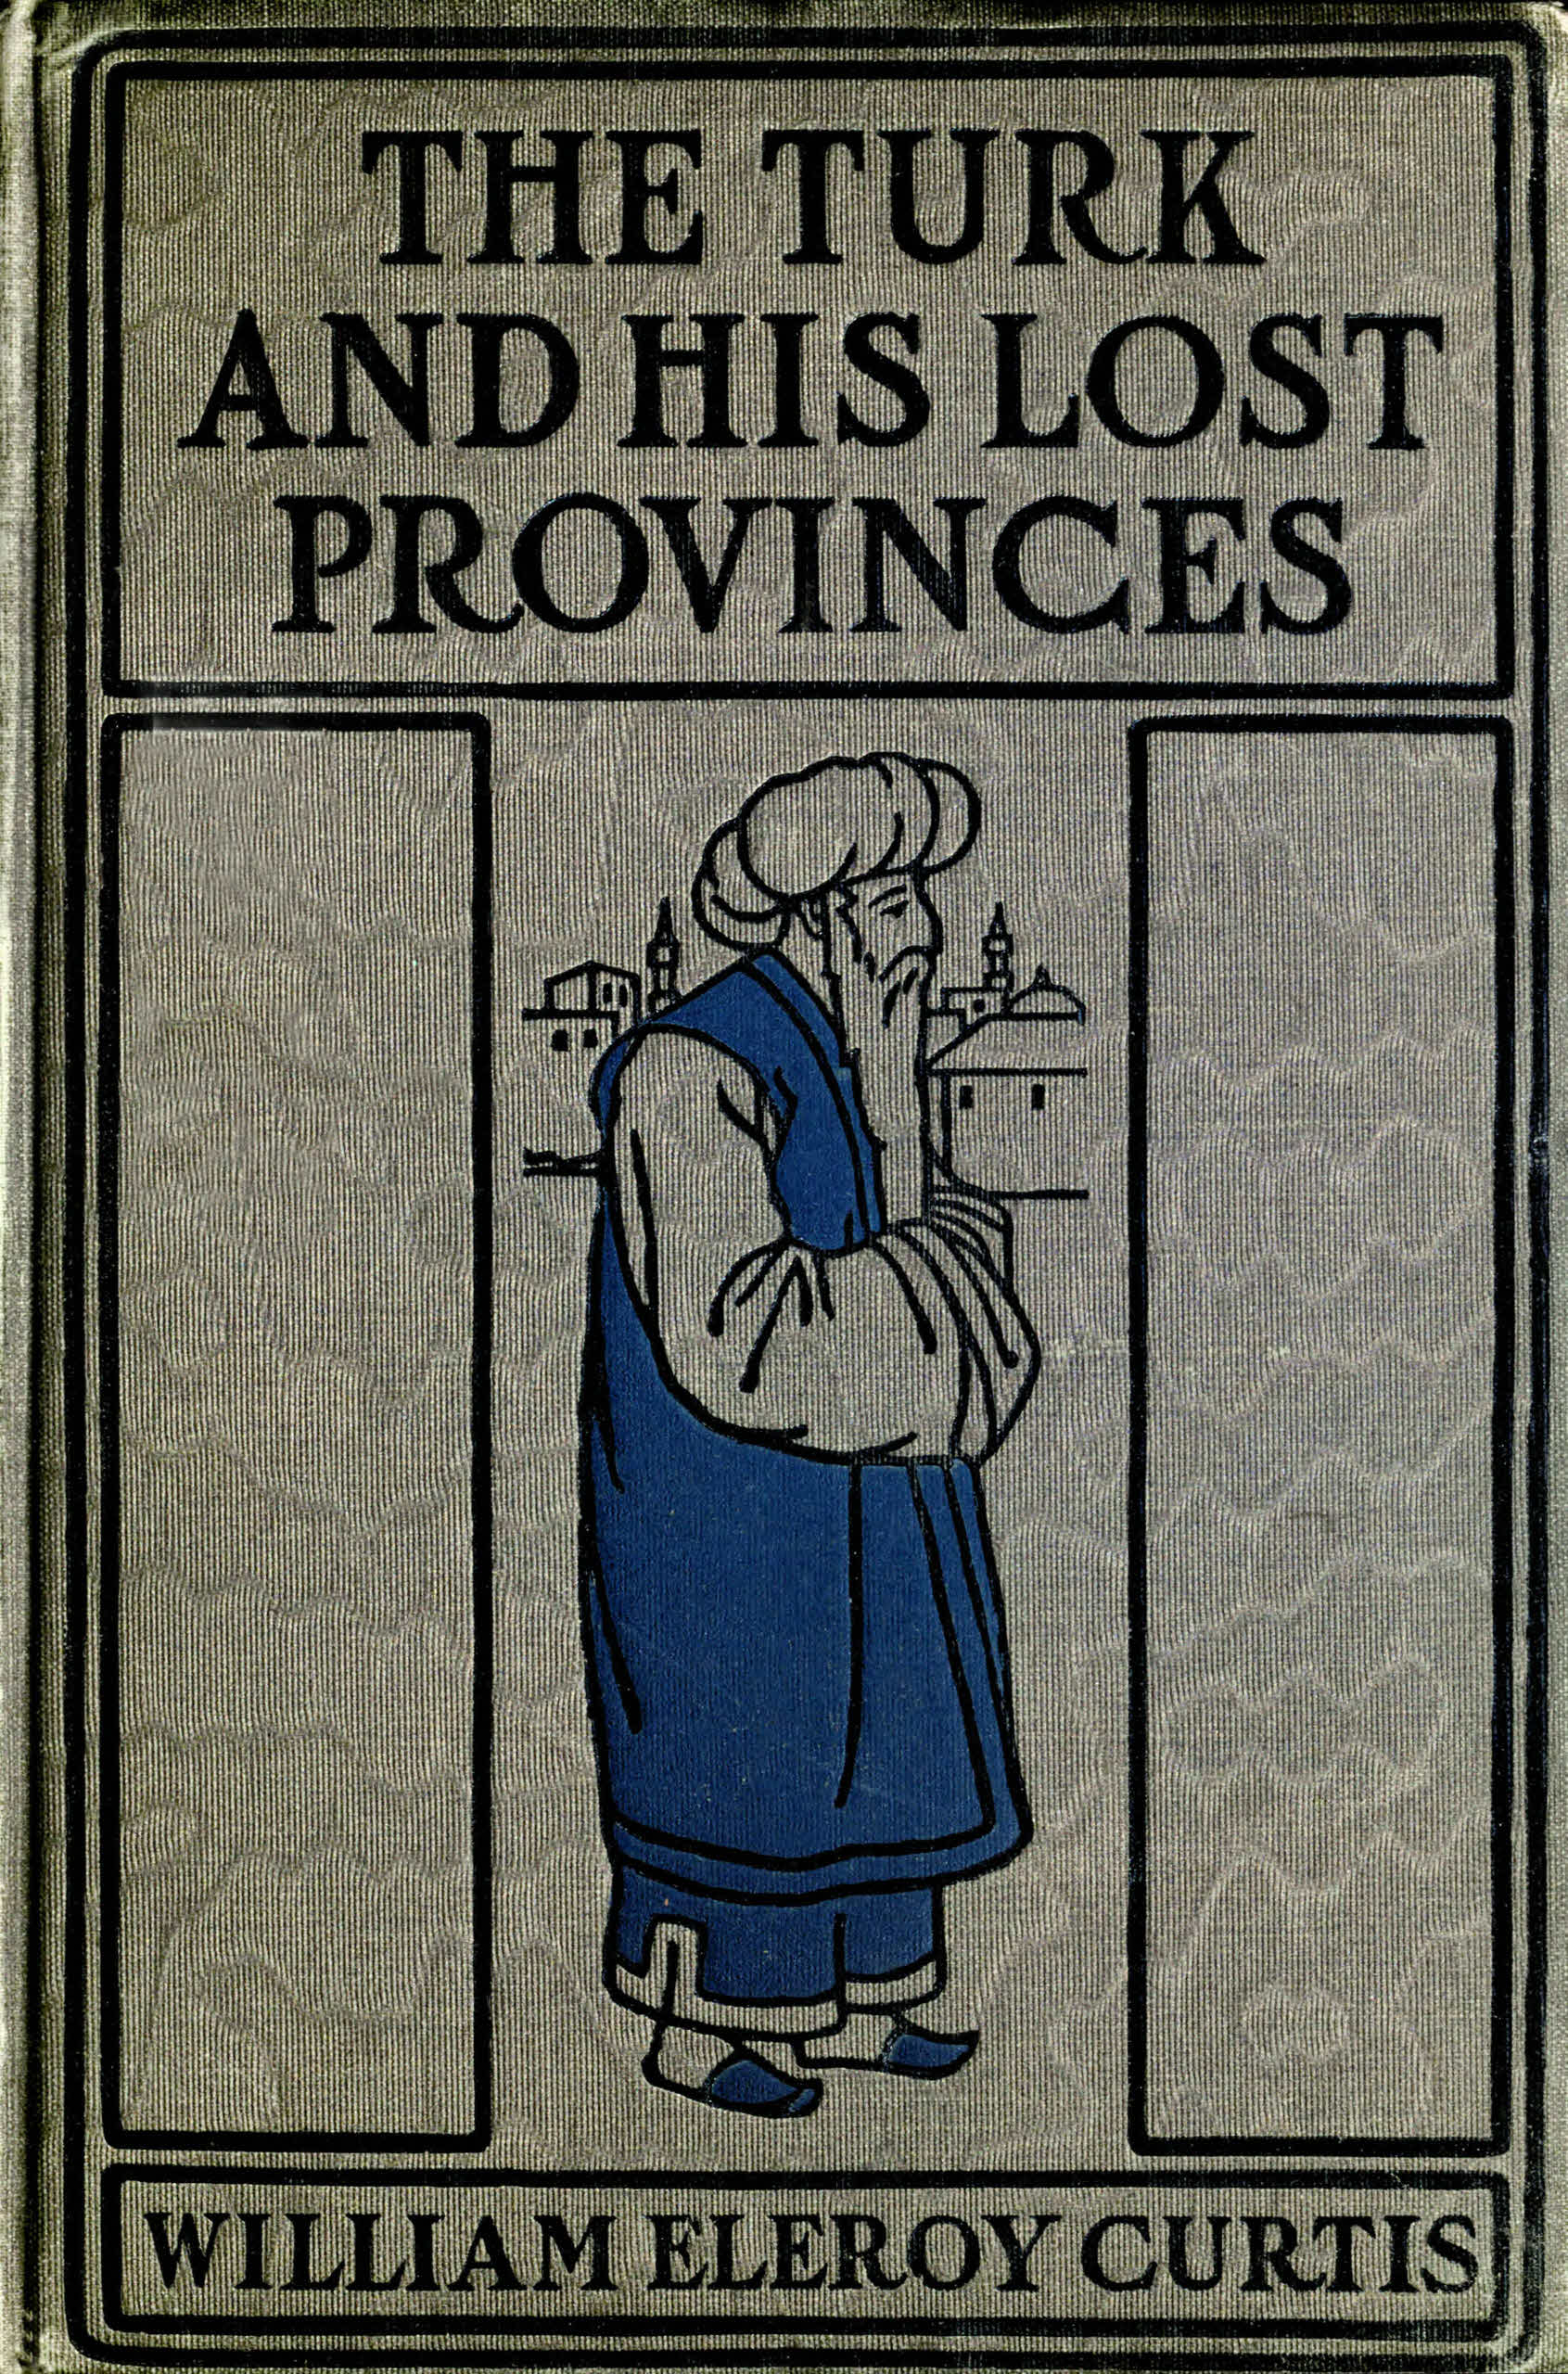 The Turk and his lost provinces Project Gutenberg picture